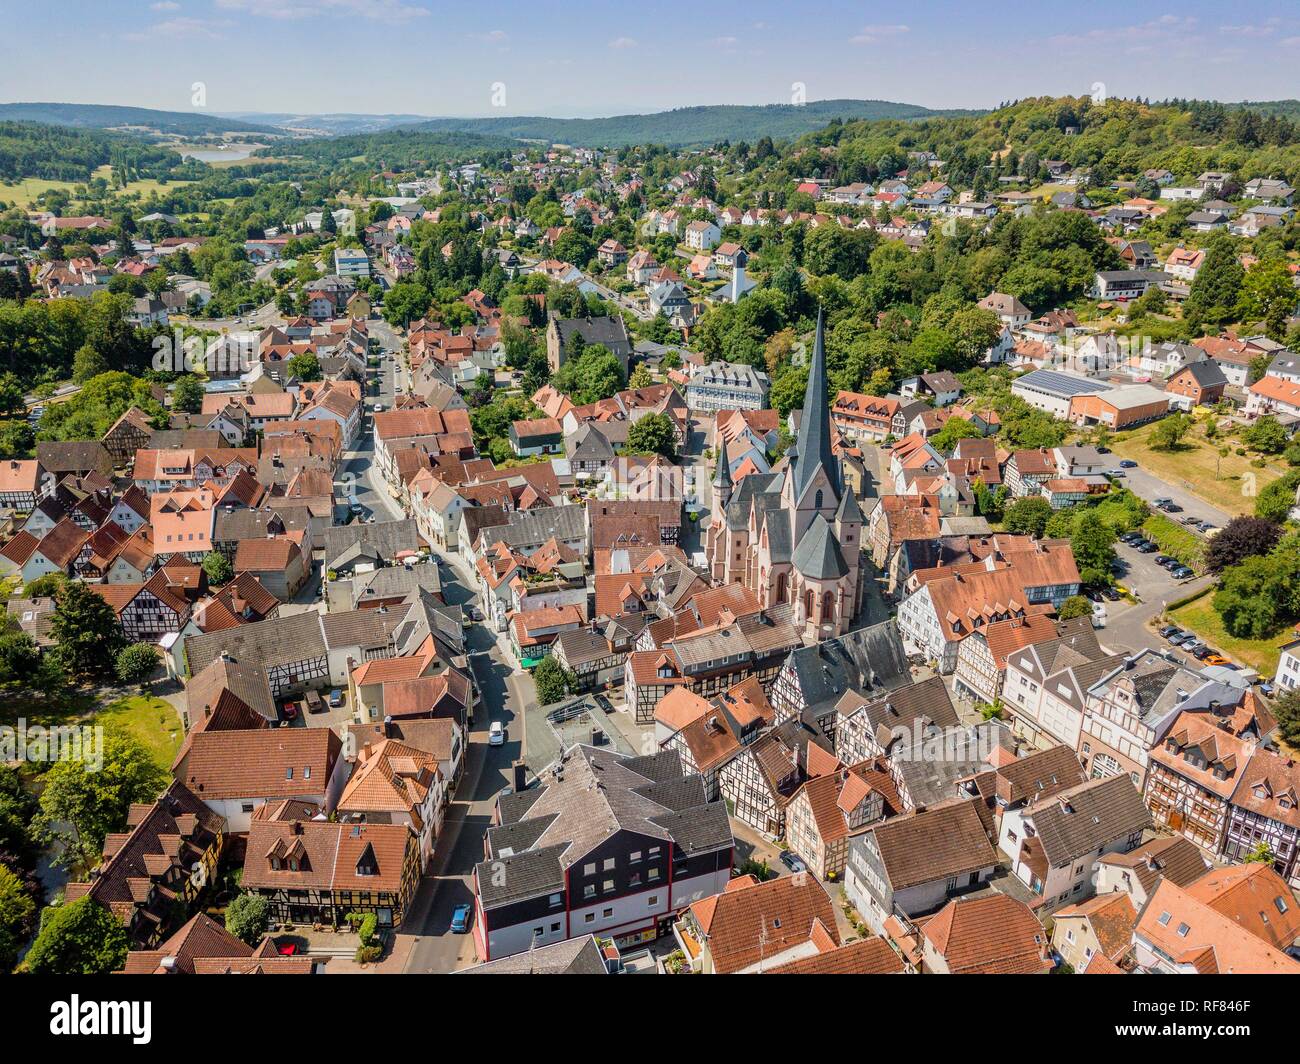 Drone image of charming little town Schotten, Hesse, Germany Stock Photo